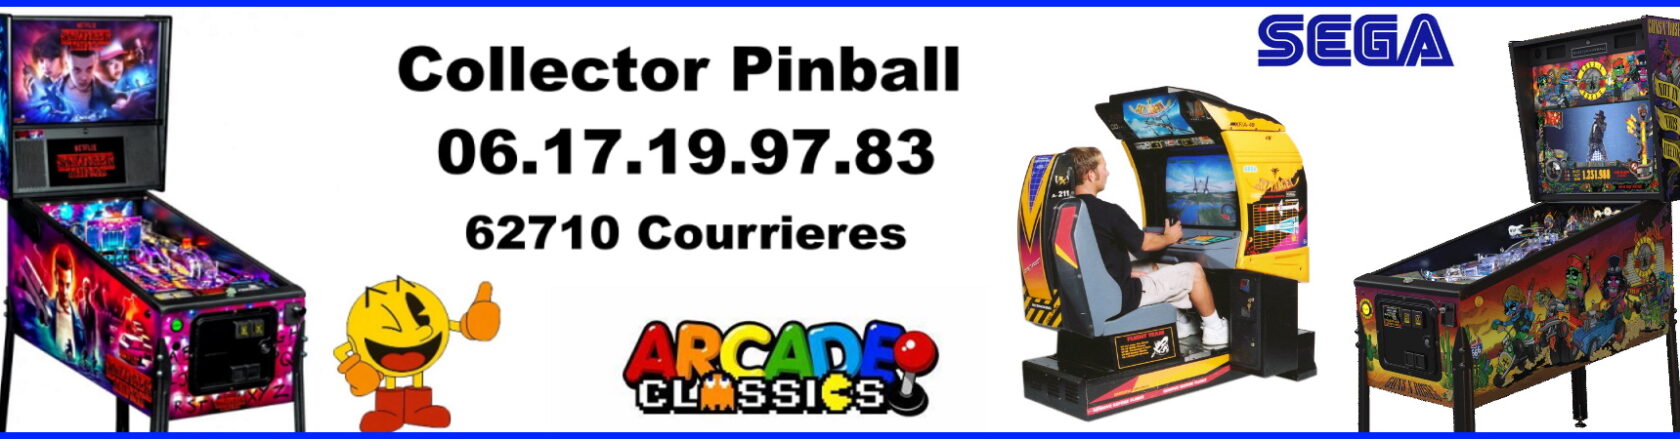 Collector Pinball Industrie